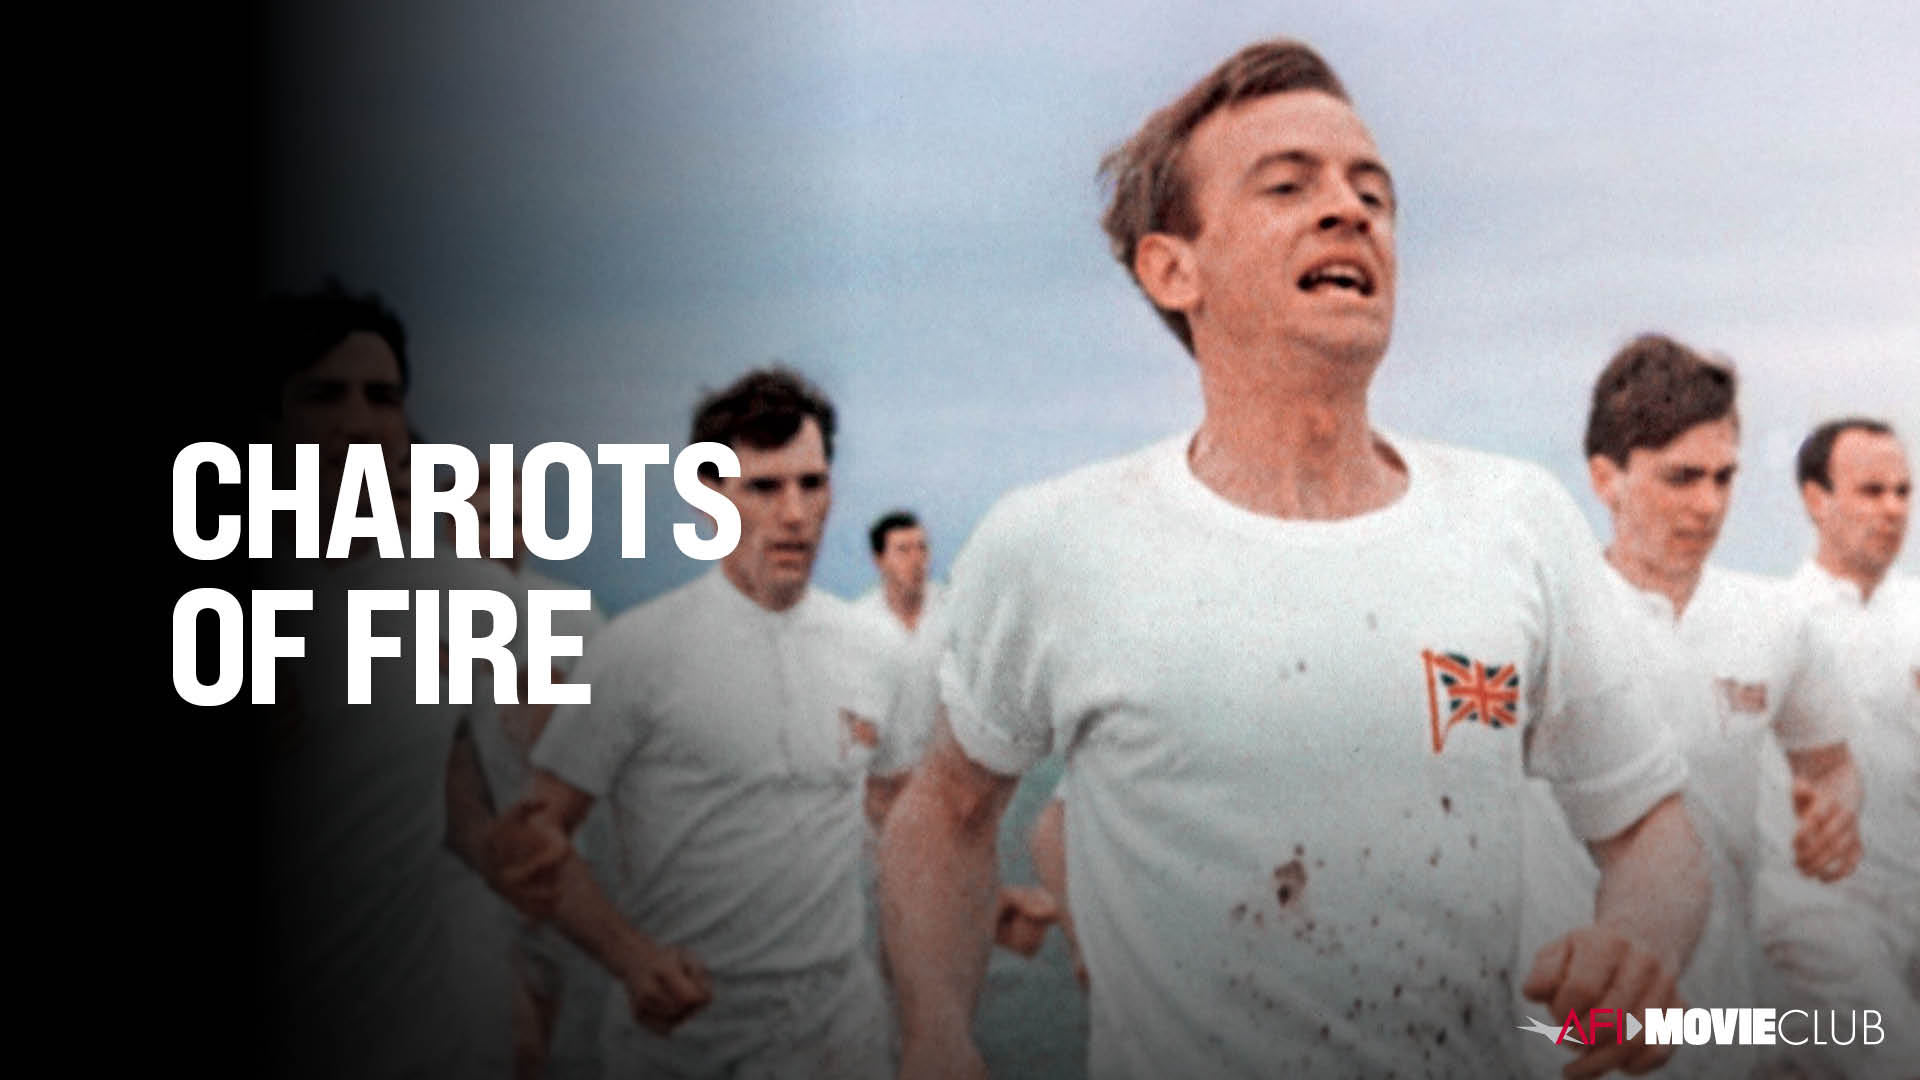 Chariots of Fire Film Still - Ben Cross and Ian Charleson